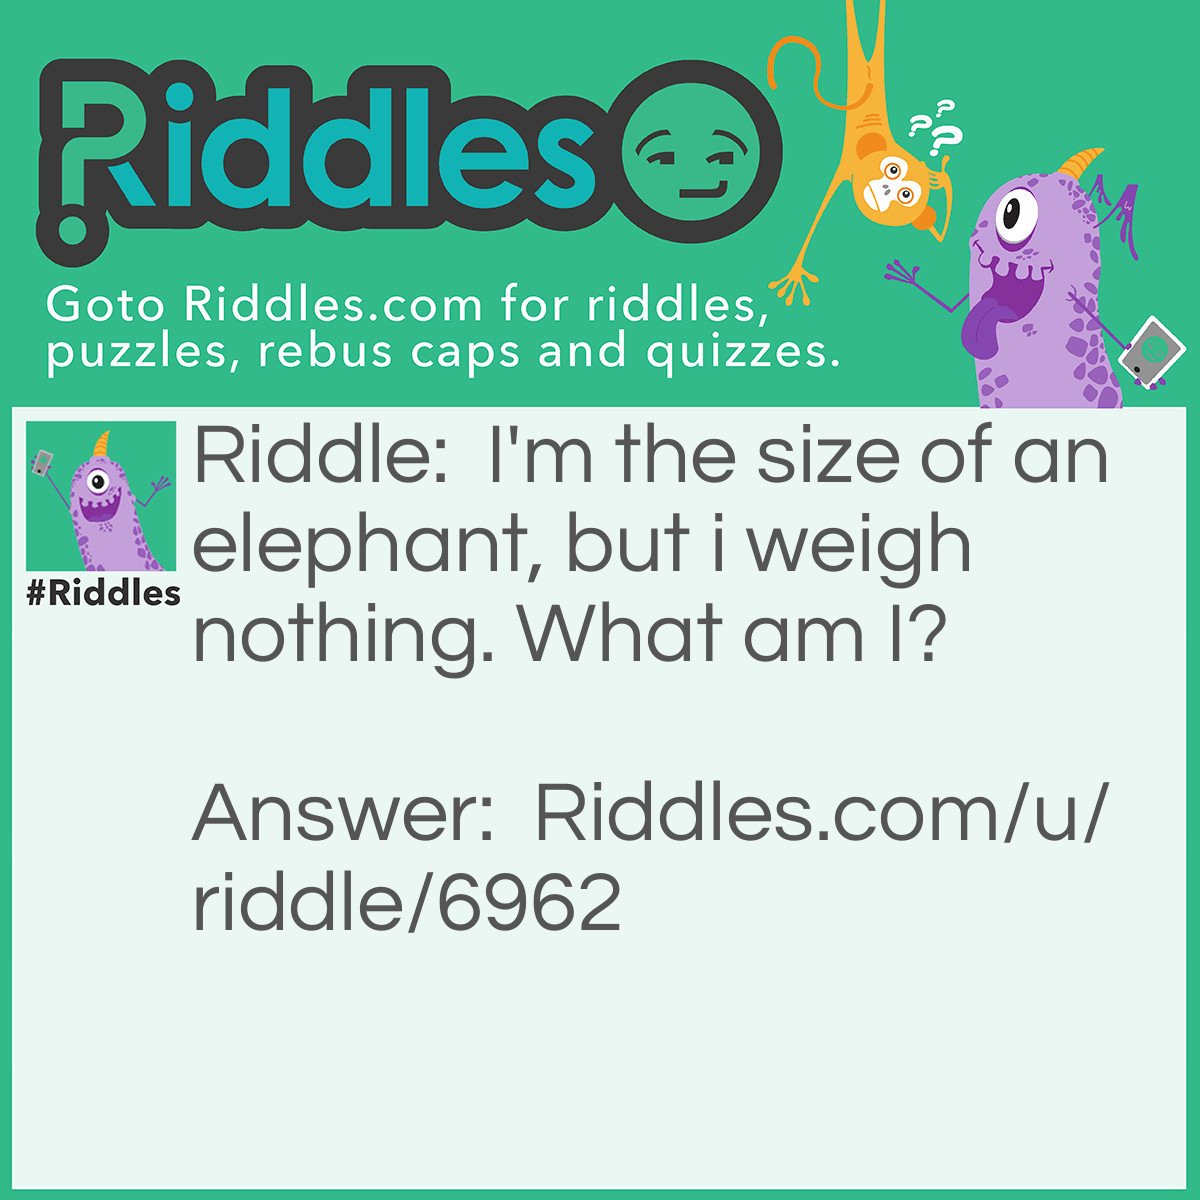 Riddle: I'm the size of an elephant, but I weigh nothing. What am I? Answer: An elephant's shadow.